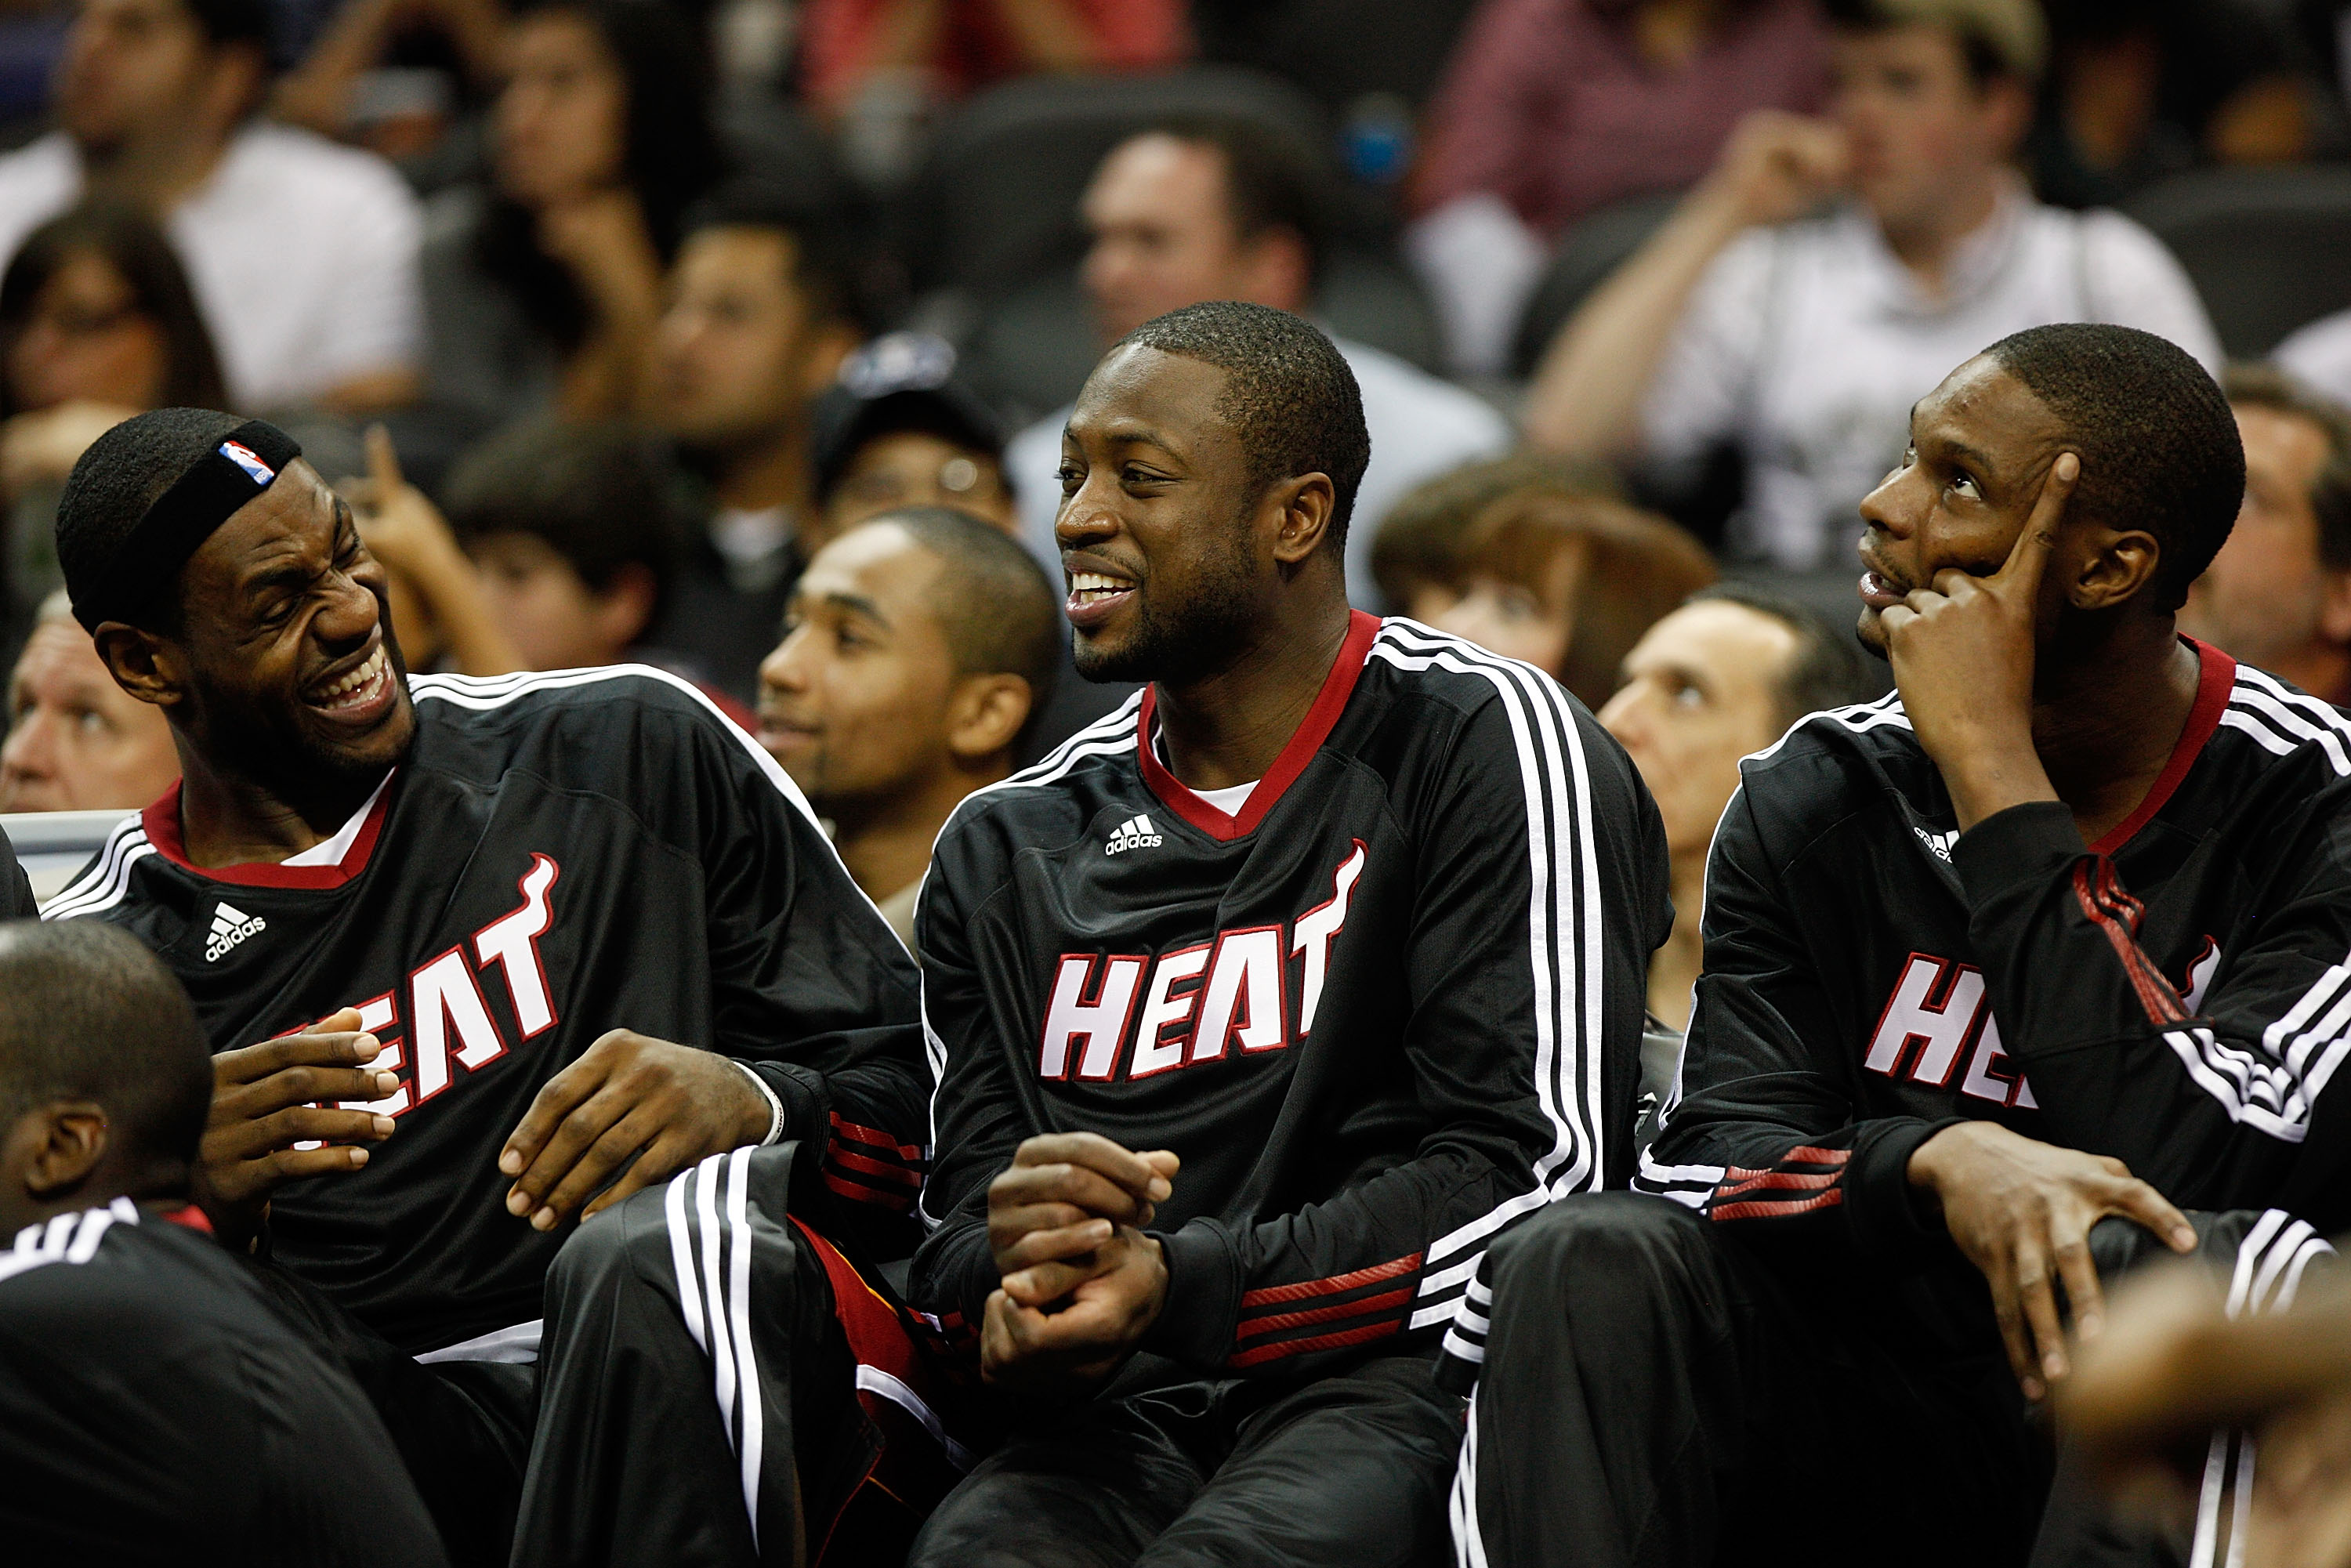 LeBron James' Miami Heat: A case study in burning out - Golden